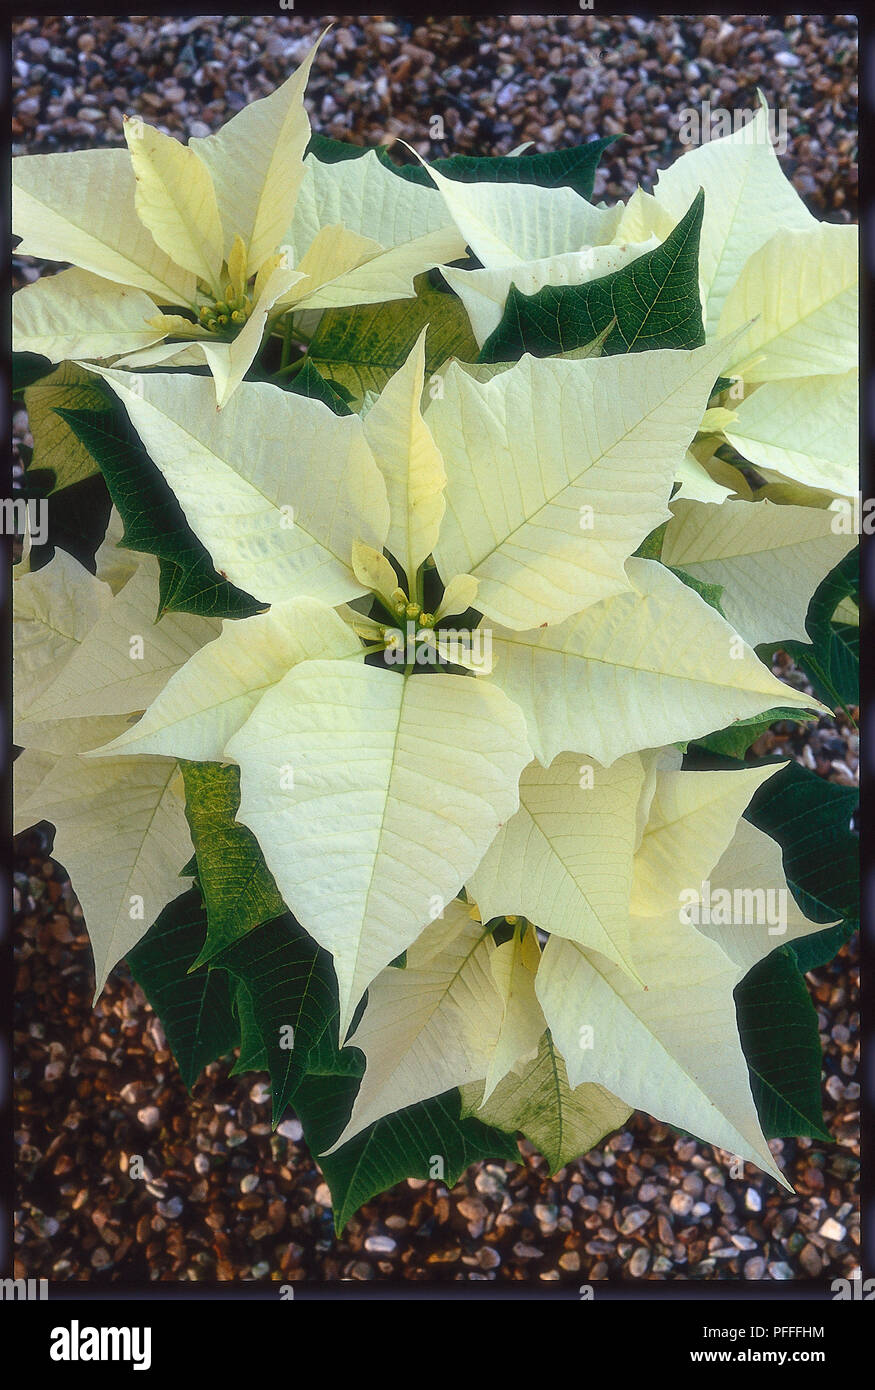 Creamy white leaves and flowers from Euphorbia pulcherrima 'Lilo White' Mexican flame leaf, Poinsettia Stock Photo